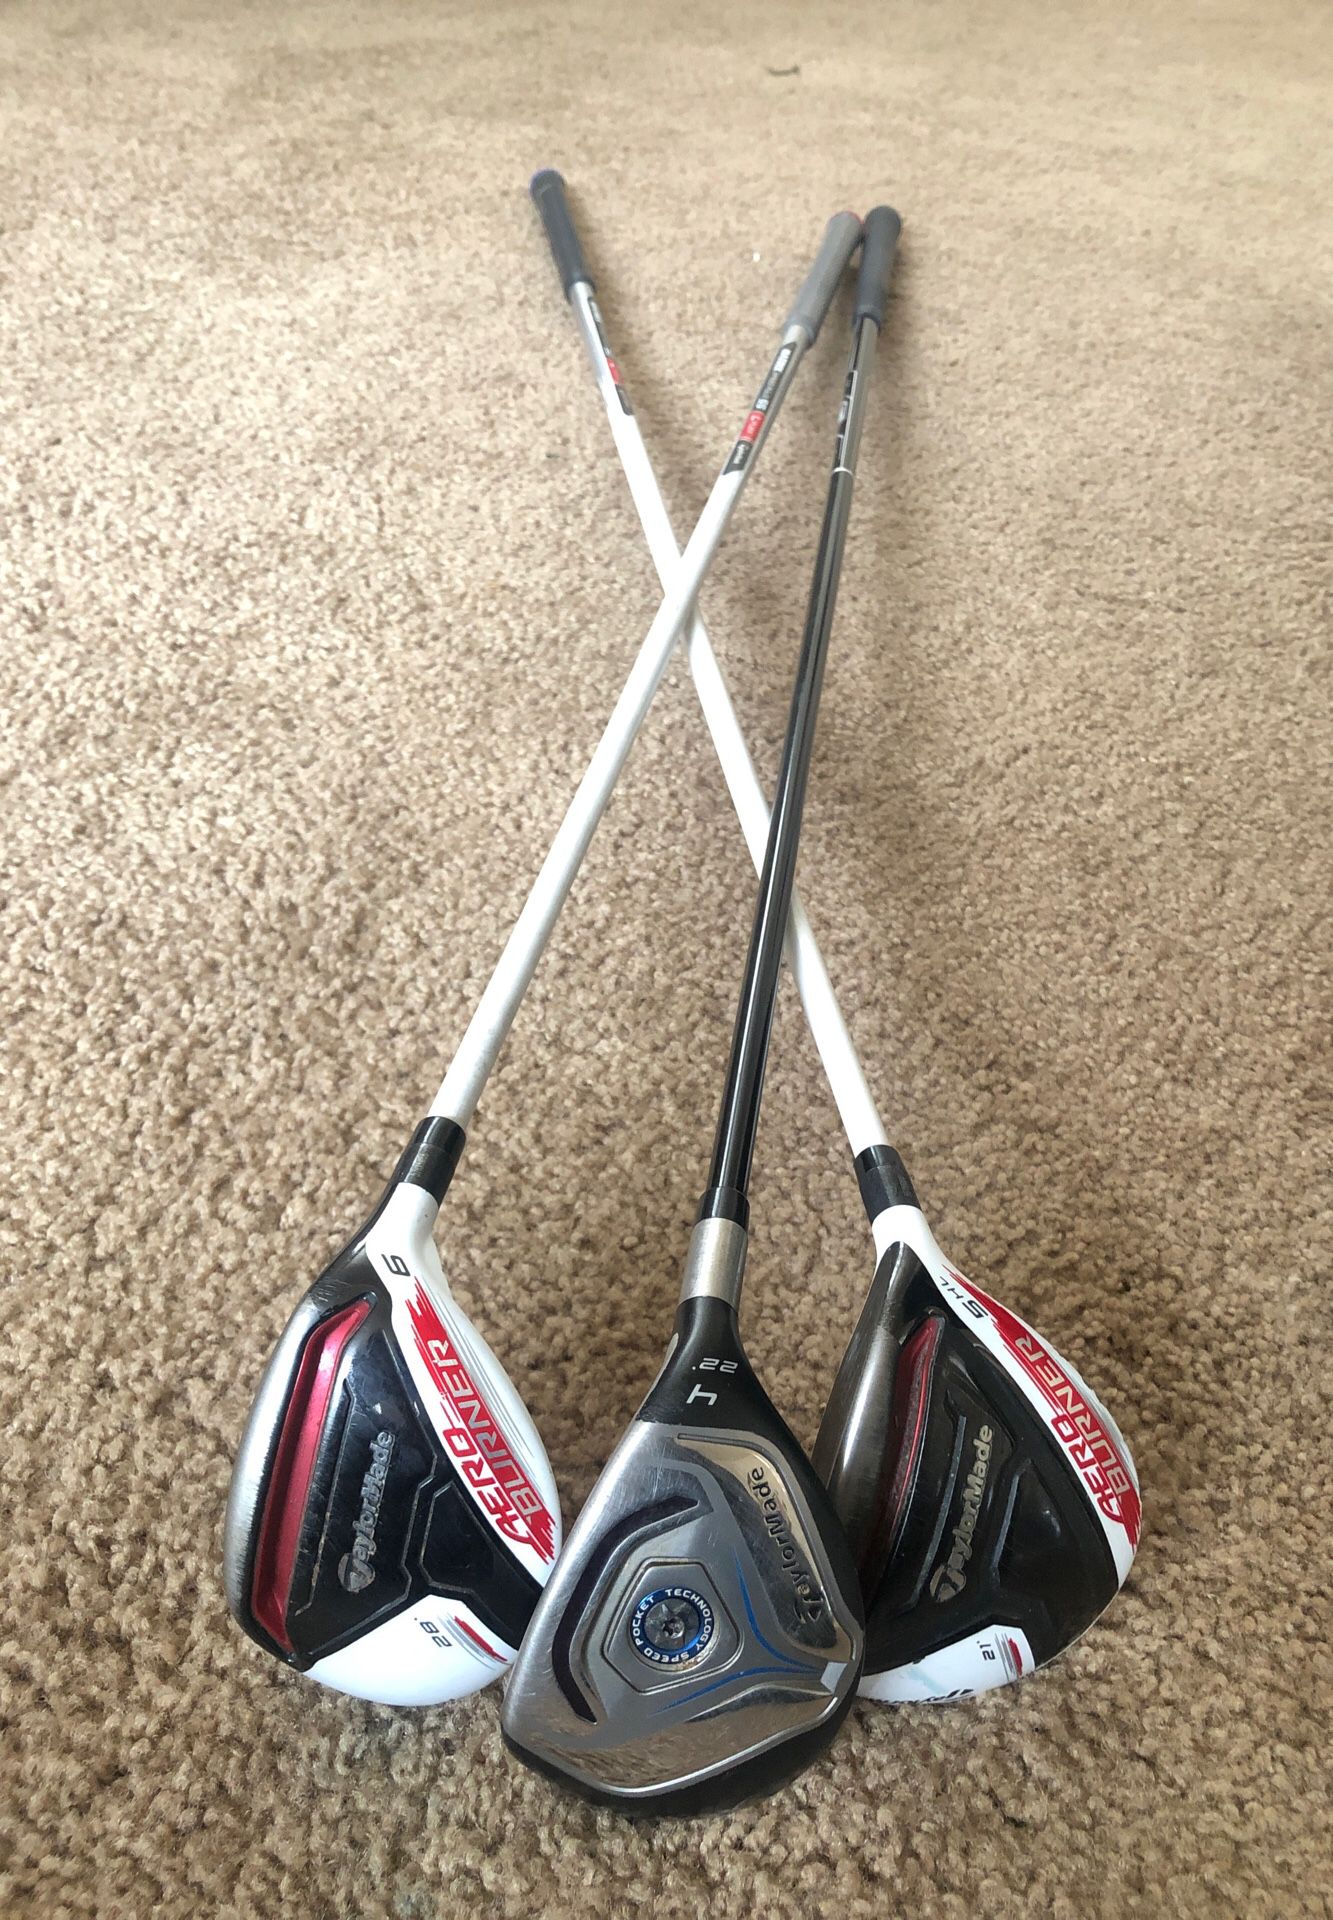 Great condition, Taylormade golf clubs. 1 season use